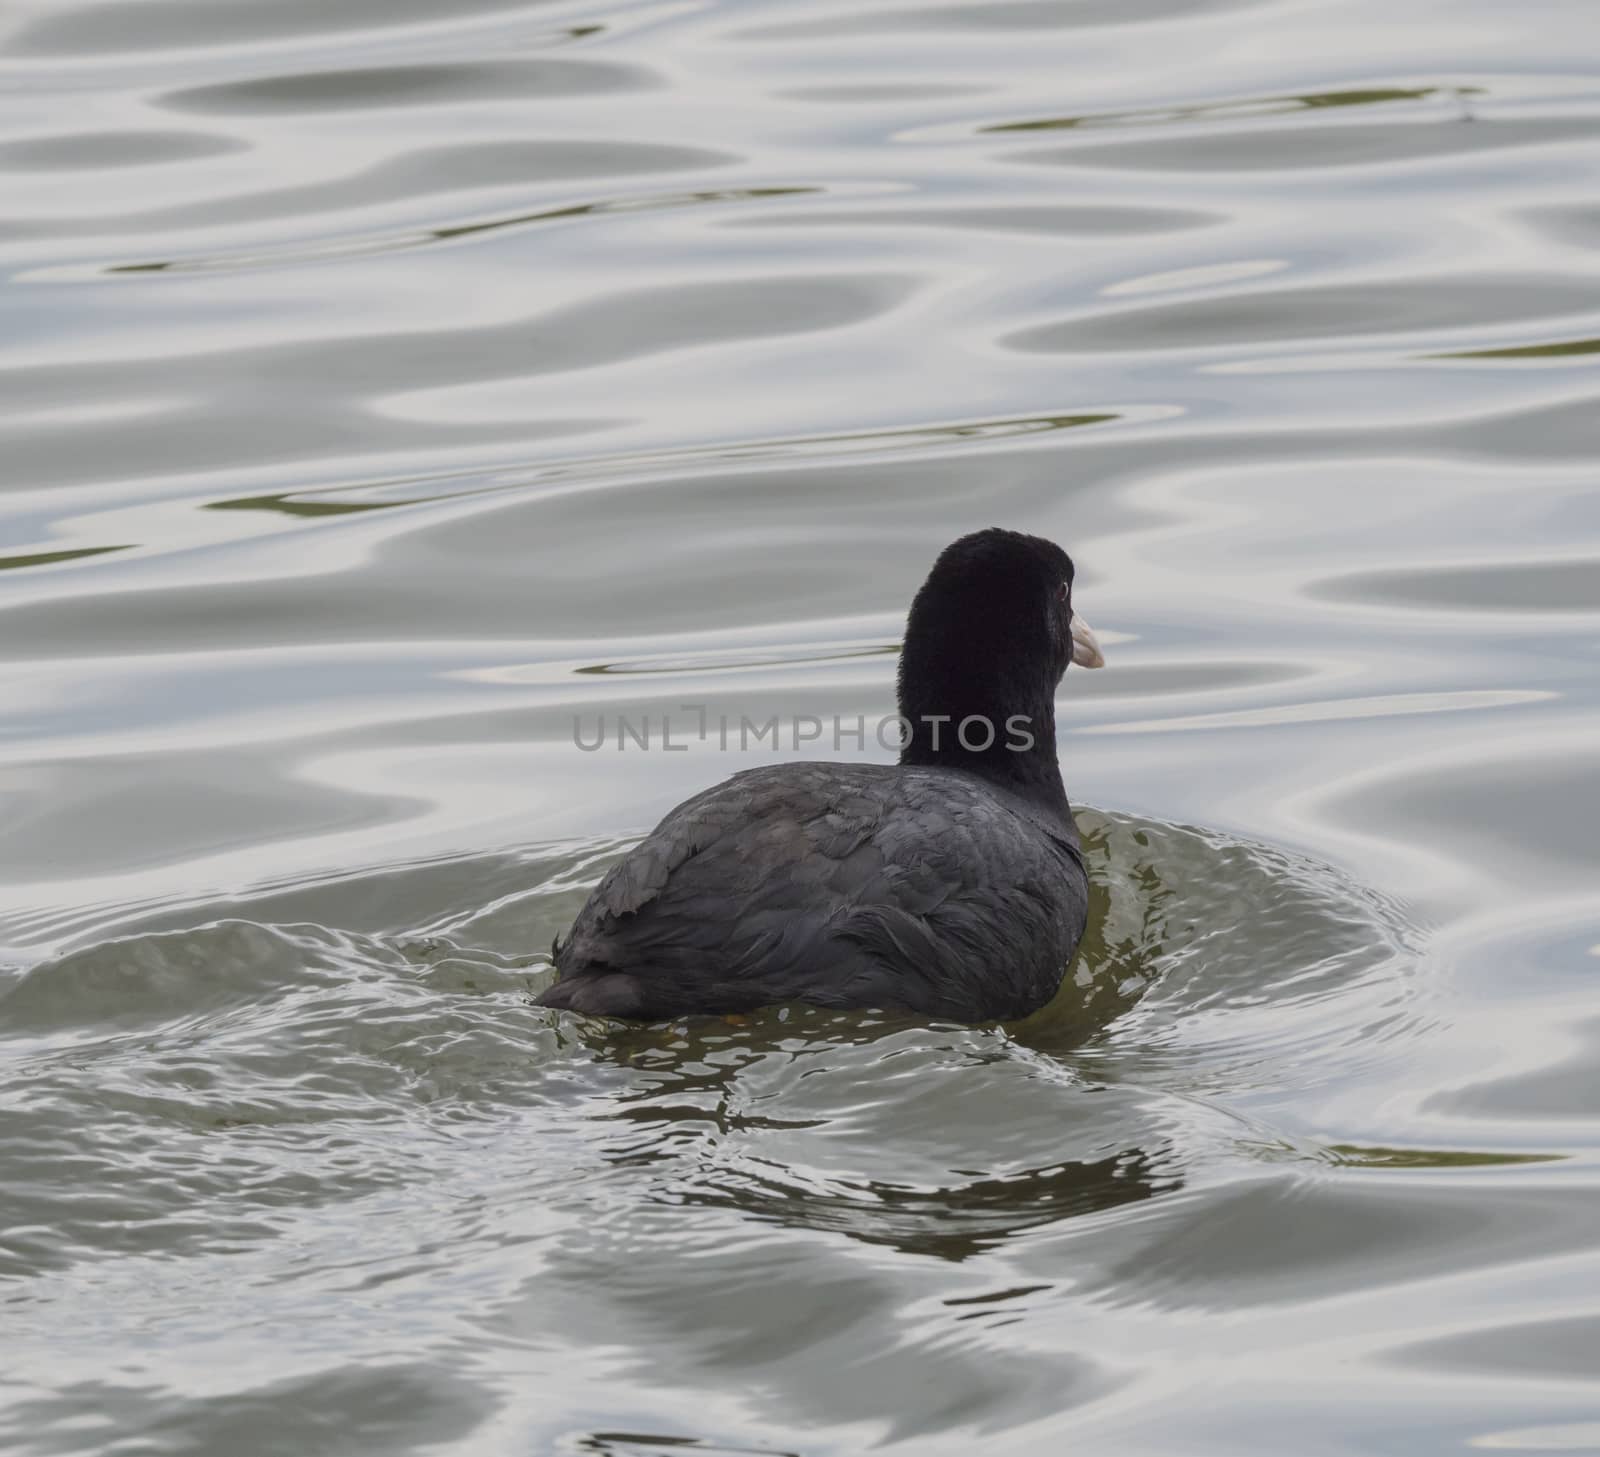 Close up Eurasian coot Fulica atra, also known as the common coot with swimming in the water of green pond.